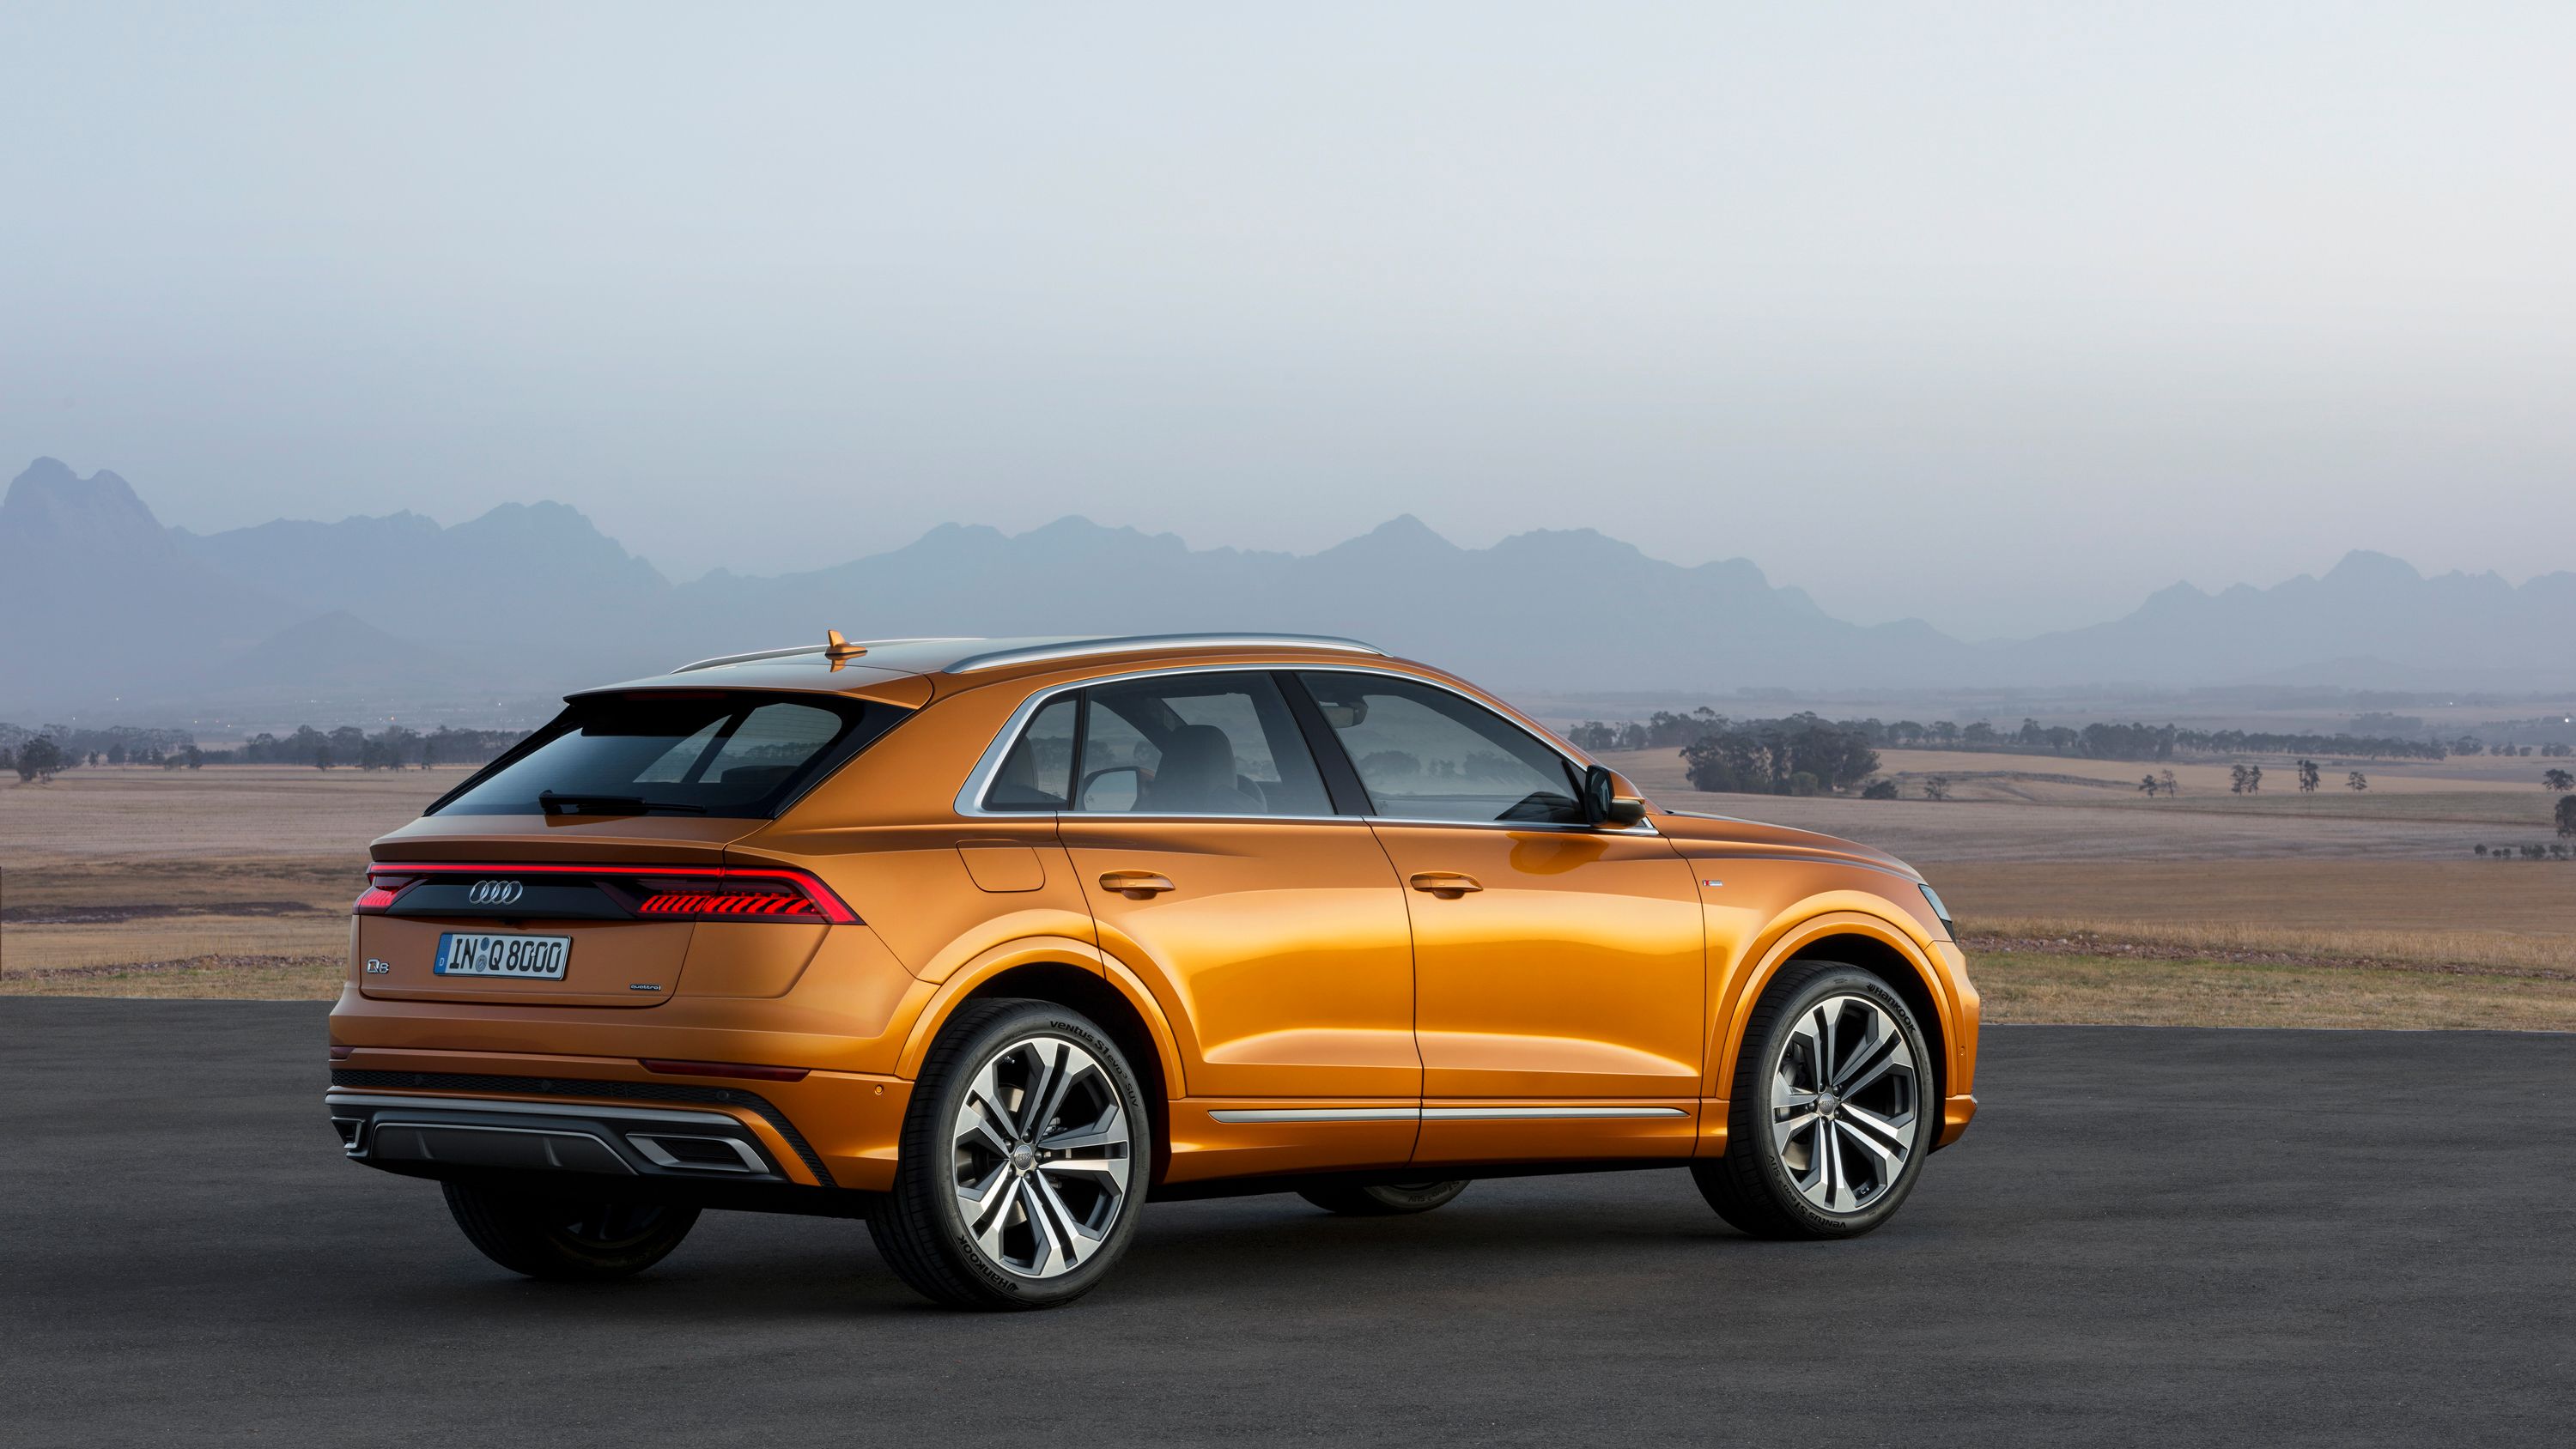 2019 Wallpaper of the Day: 2019 Audi Q8